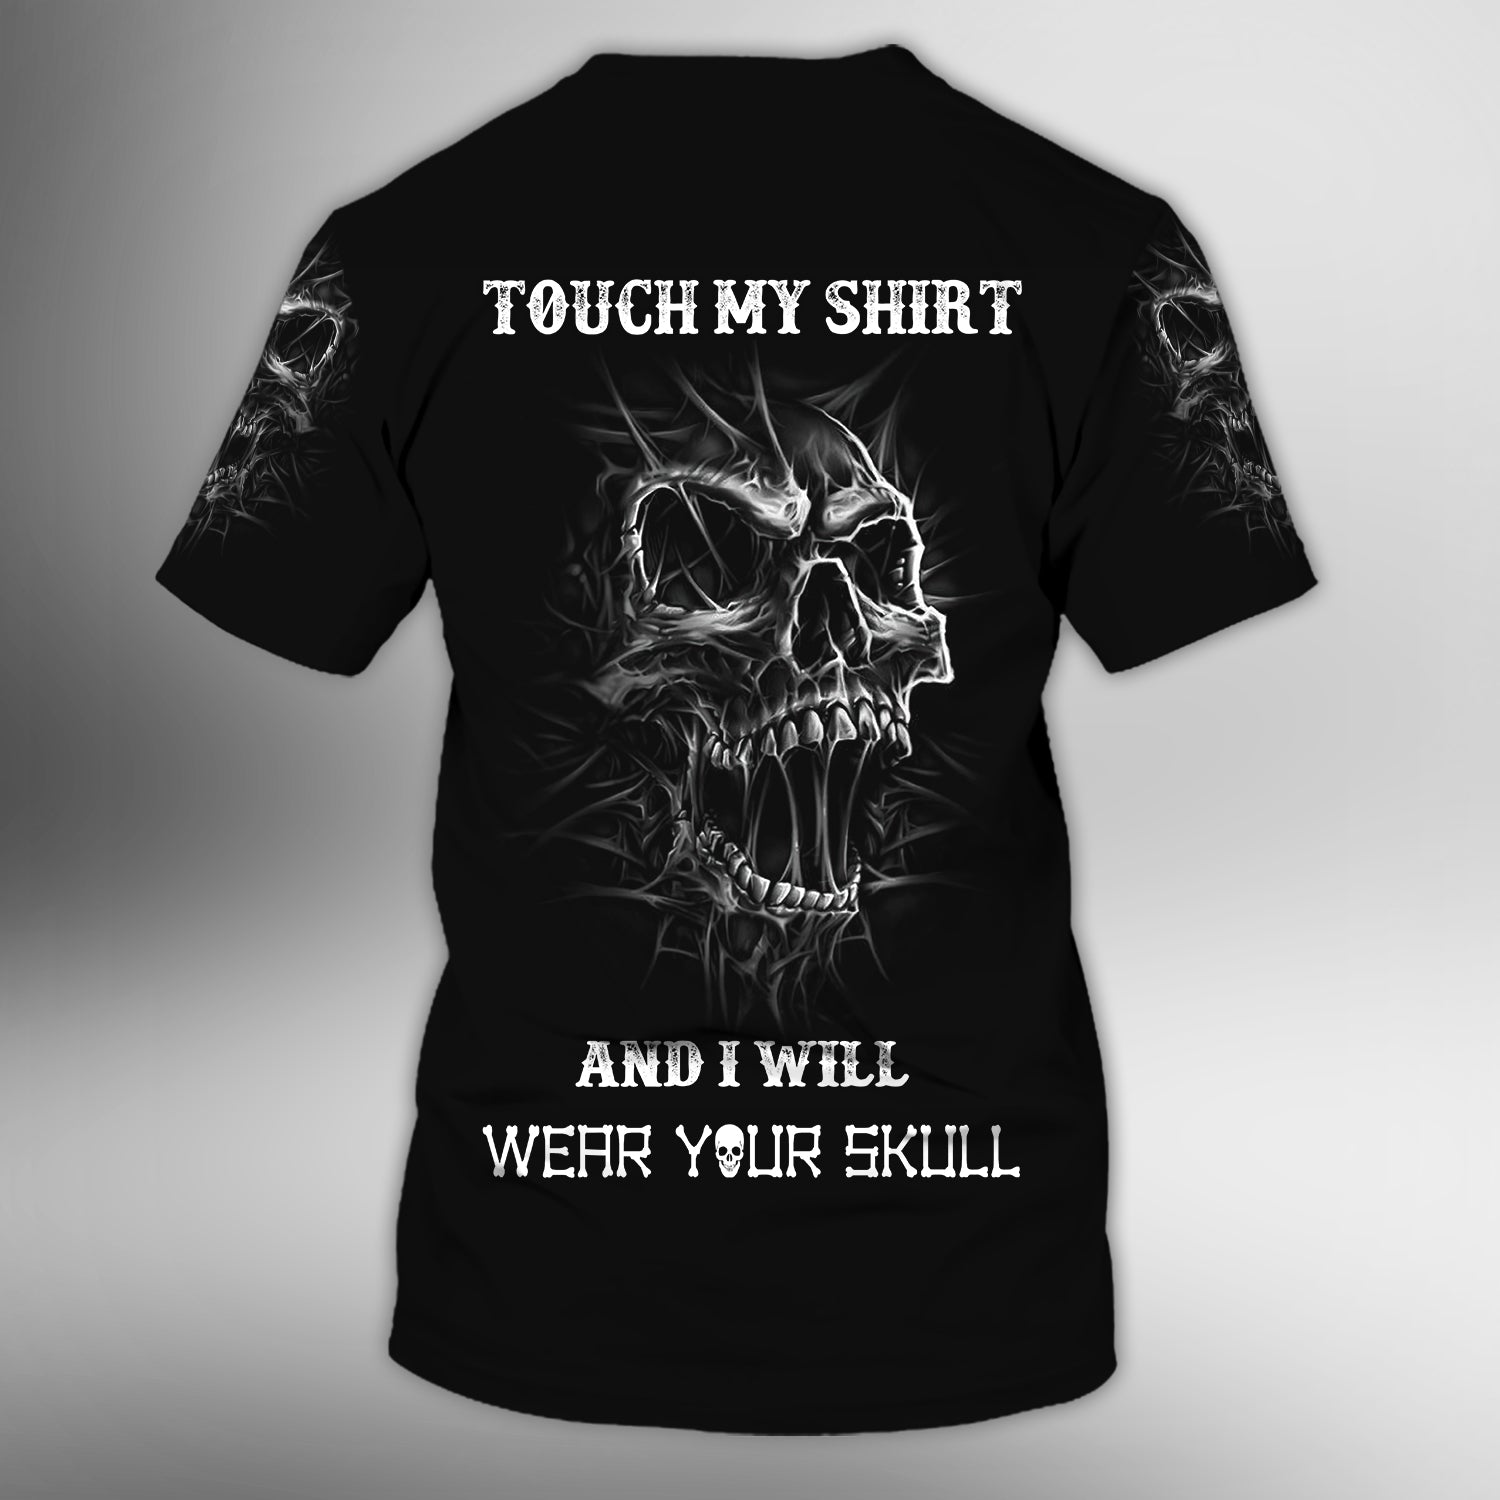 Don't touch my shirt - Personalized Name 3D Tshirt - Nmd 34